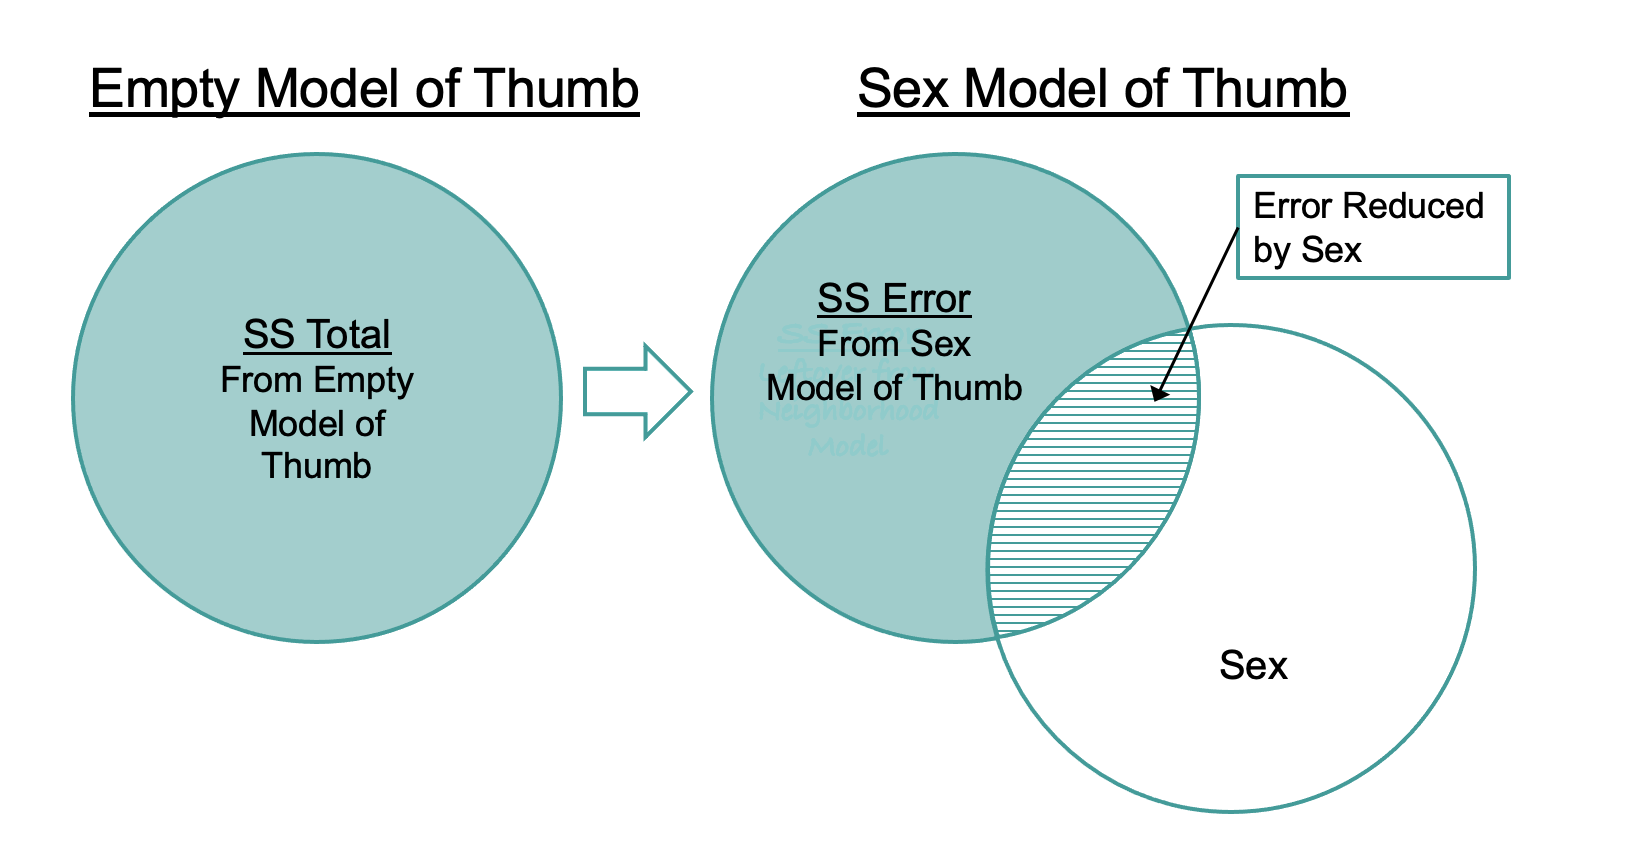 On the left, a single circle represents SS Total from the Empty Model of Thumb. An arrow from that circle points to a Venn diagram of two partially overlapping circles to the right. One circle is labeled as SS Error from the Sex Model of Thumb, and the other circle is labeled as Sex. The intersection where the two circles overlap is labeled as Error Reduced by Sex.